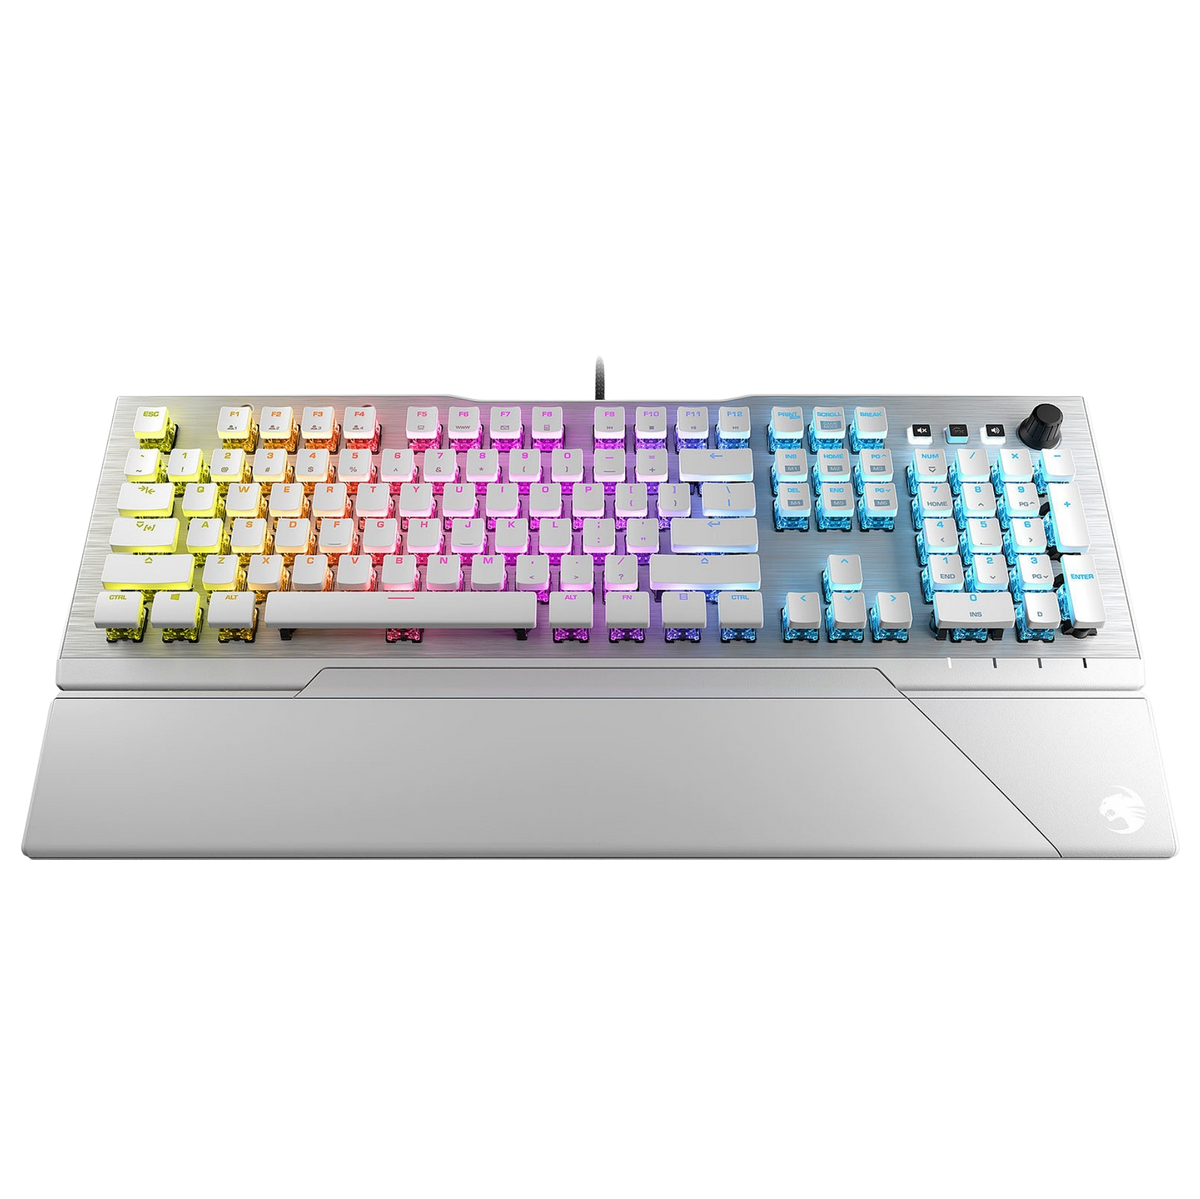 ROCCAT Vulcan 122 Silver White Aimo RGB Mechanical Gaming Keyboard (Brown Axis)